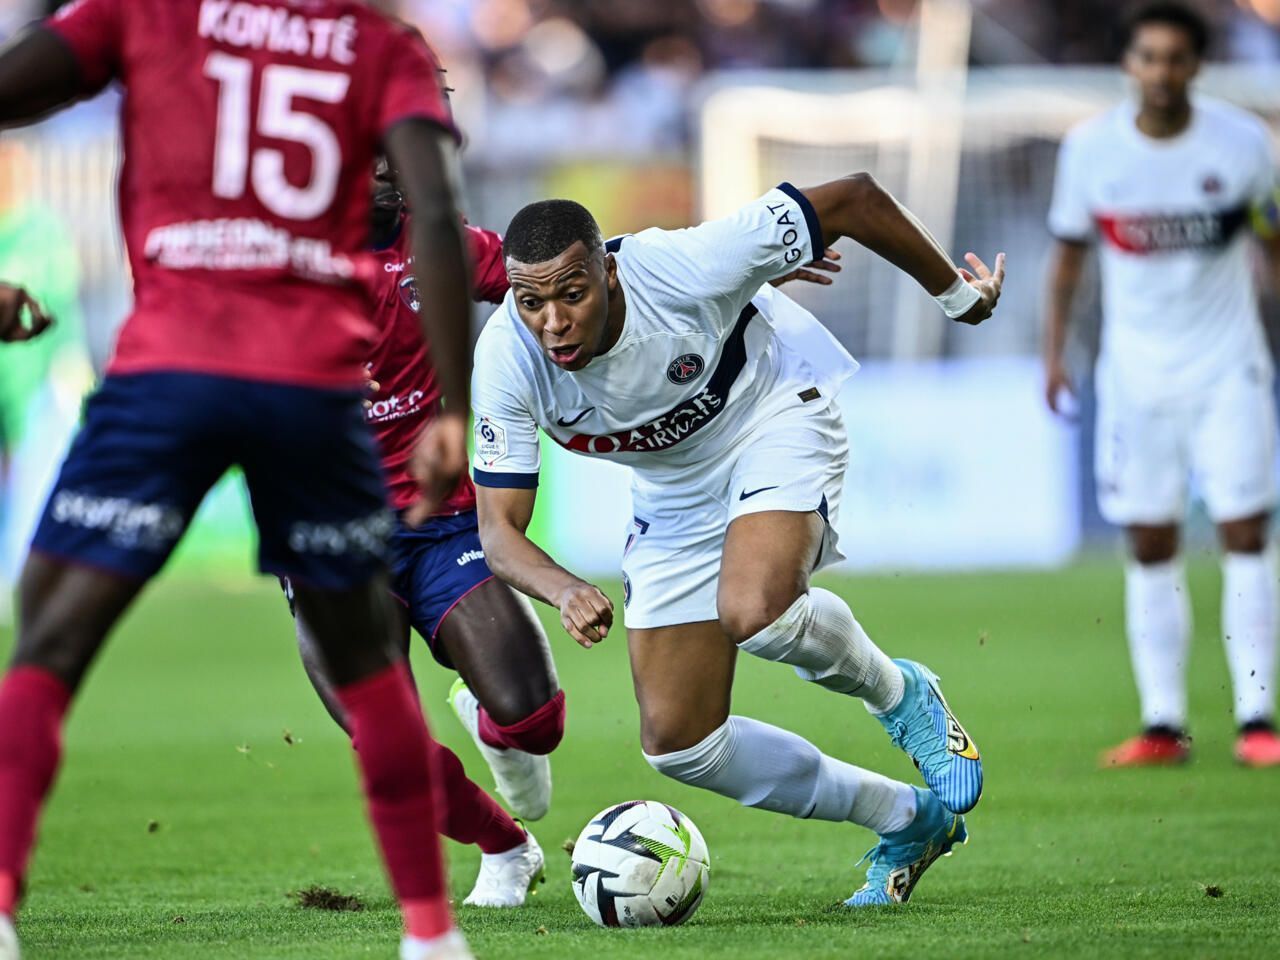 PSG were held to a goalless draw by Clermont in Ligue 1.